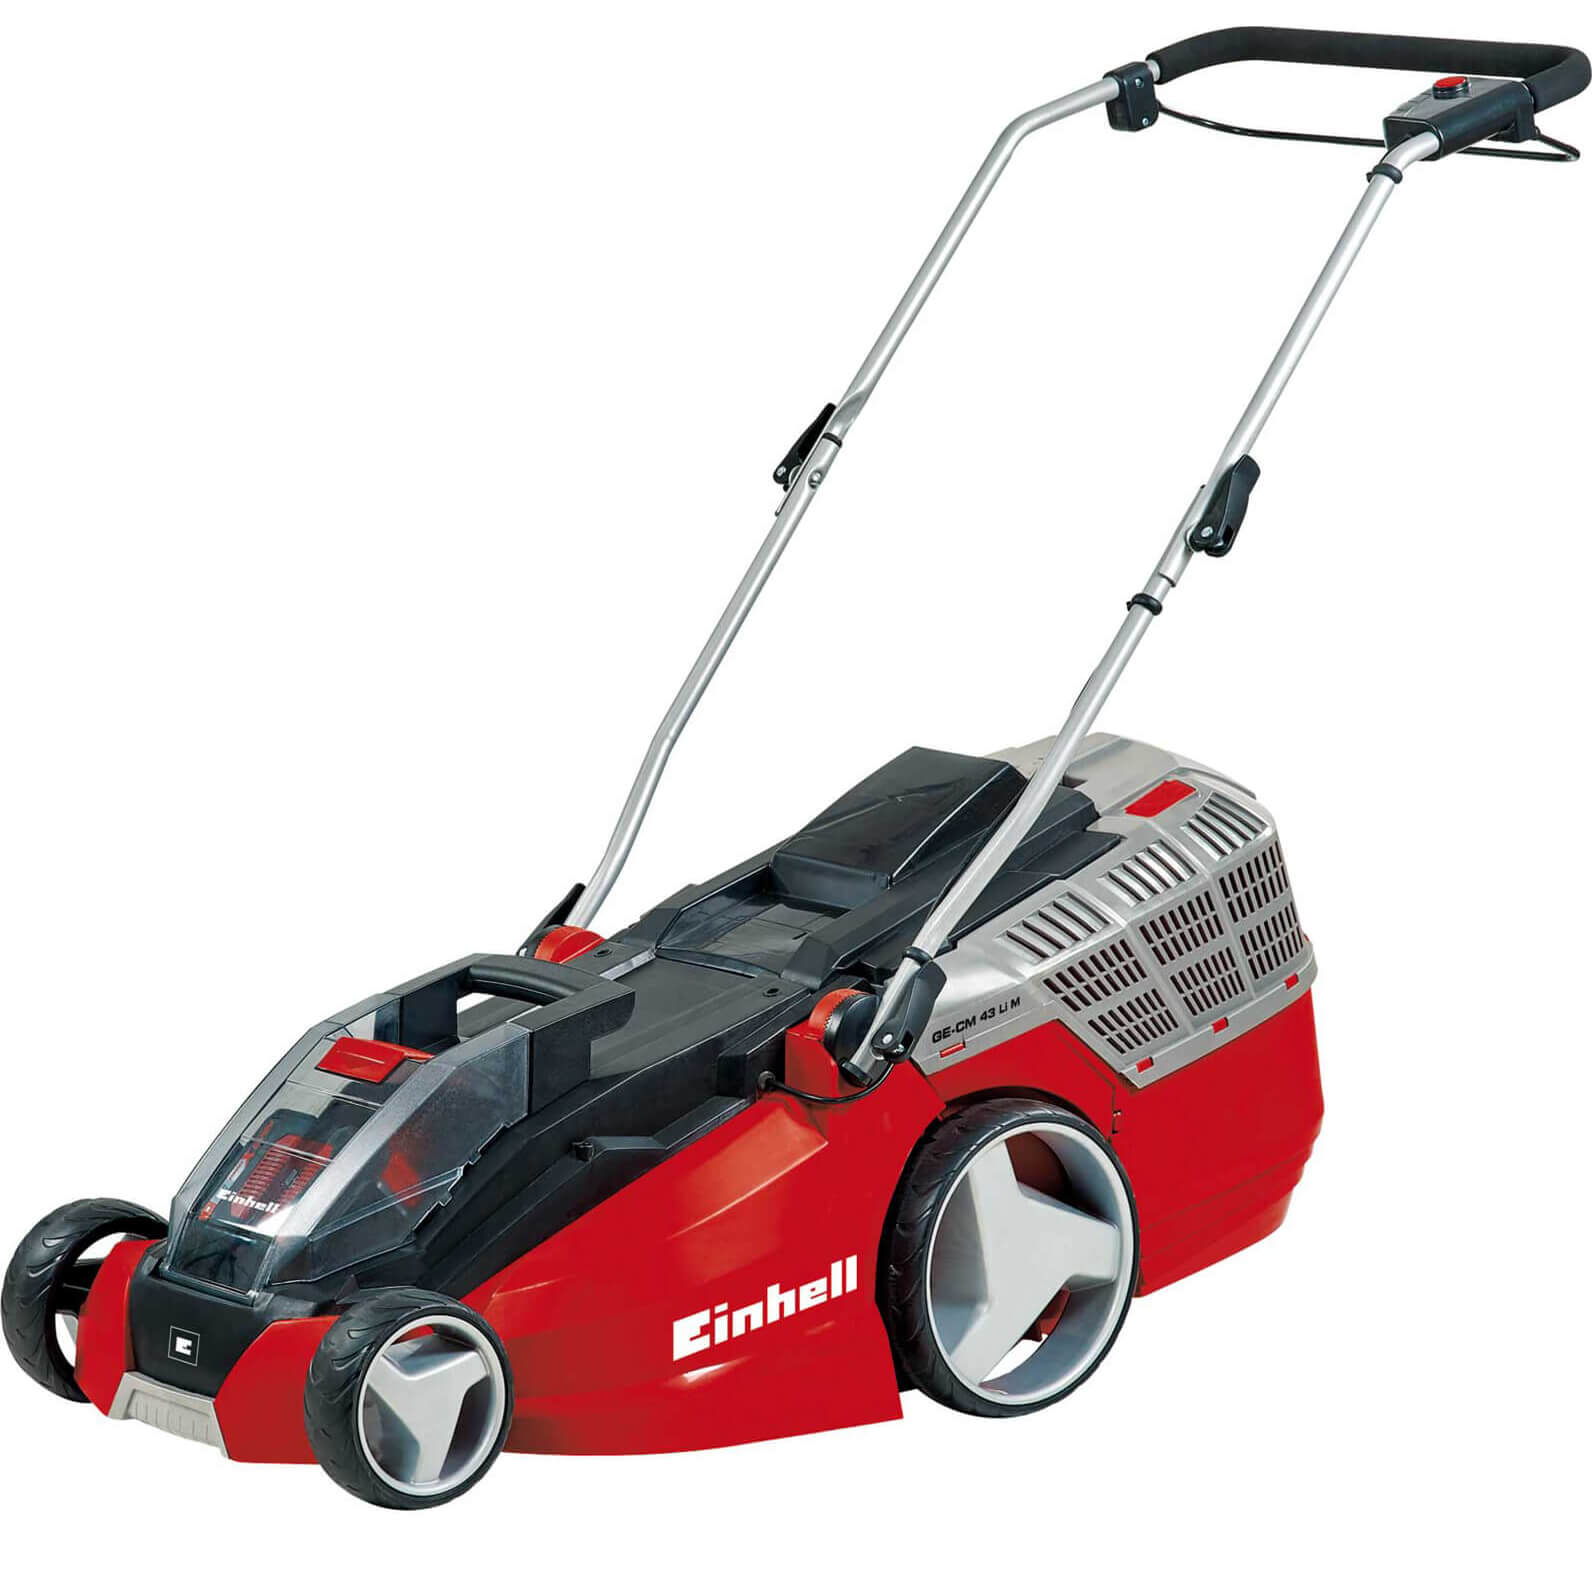 Image of Einhell GE-CM 43 Li M 36v Cordless Brushless Lawnmower 430mm No Batteries No Charger